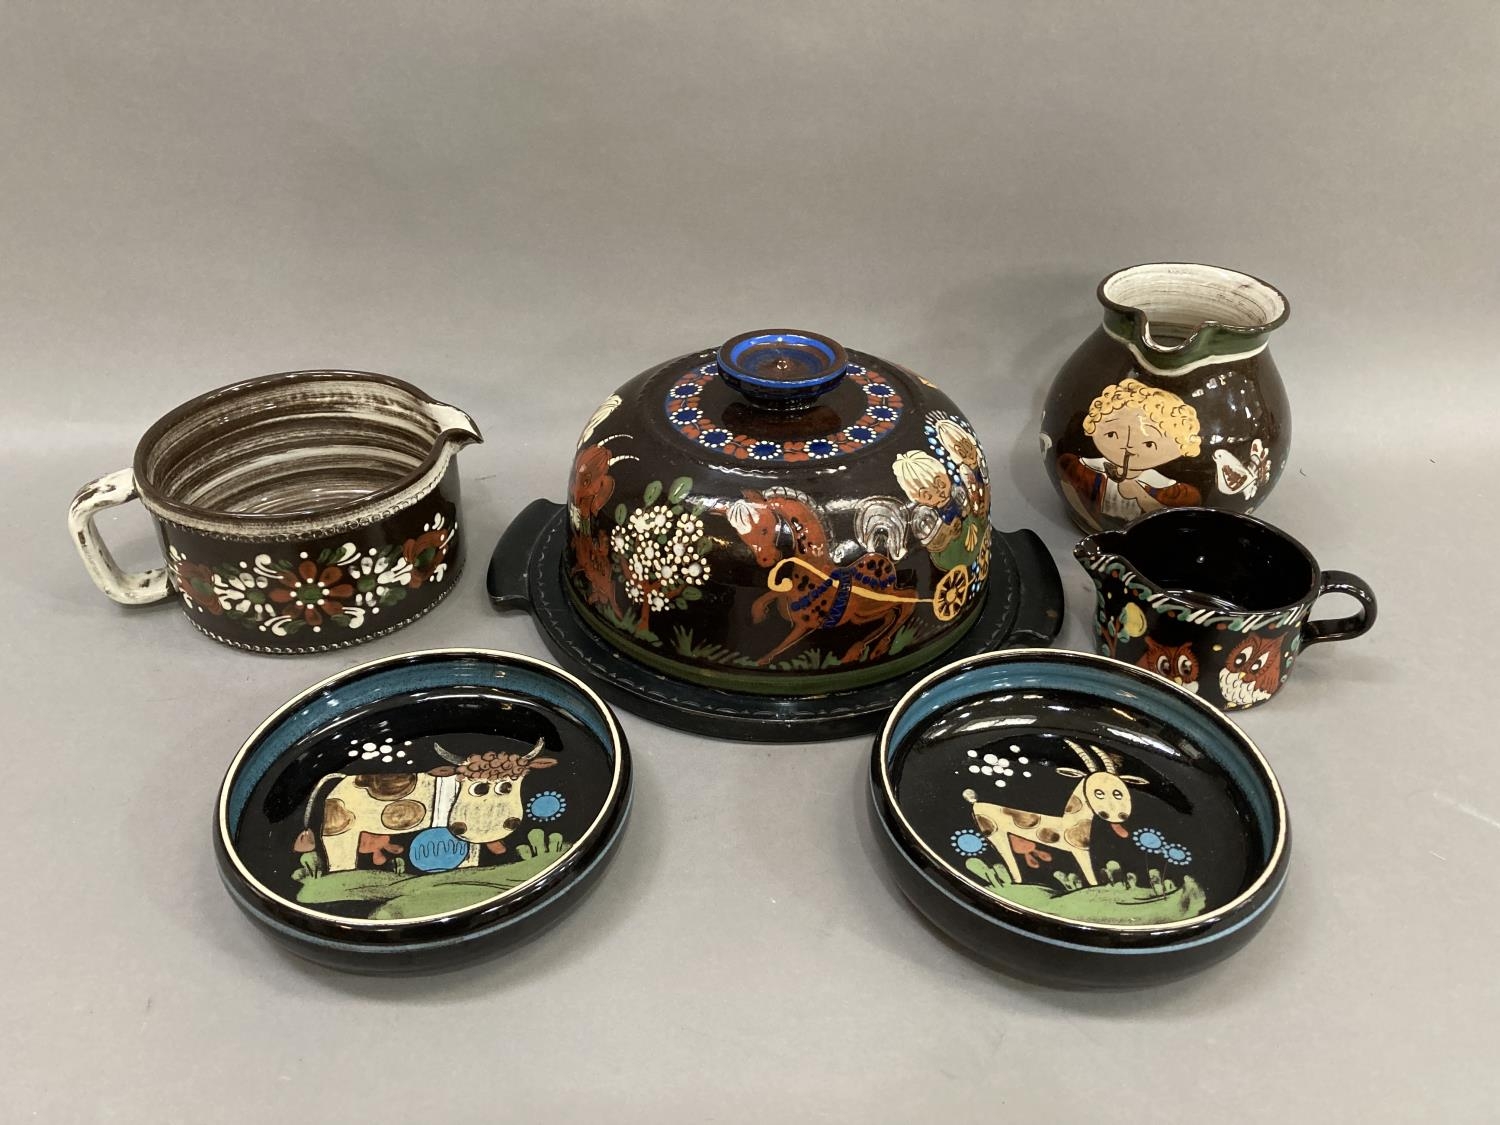 A collection of Swiss folk art pottery comprising, a cheese bell and dish by Daniel Stahli, Kholer